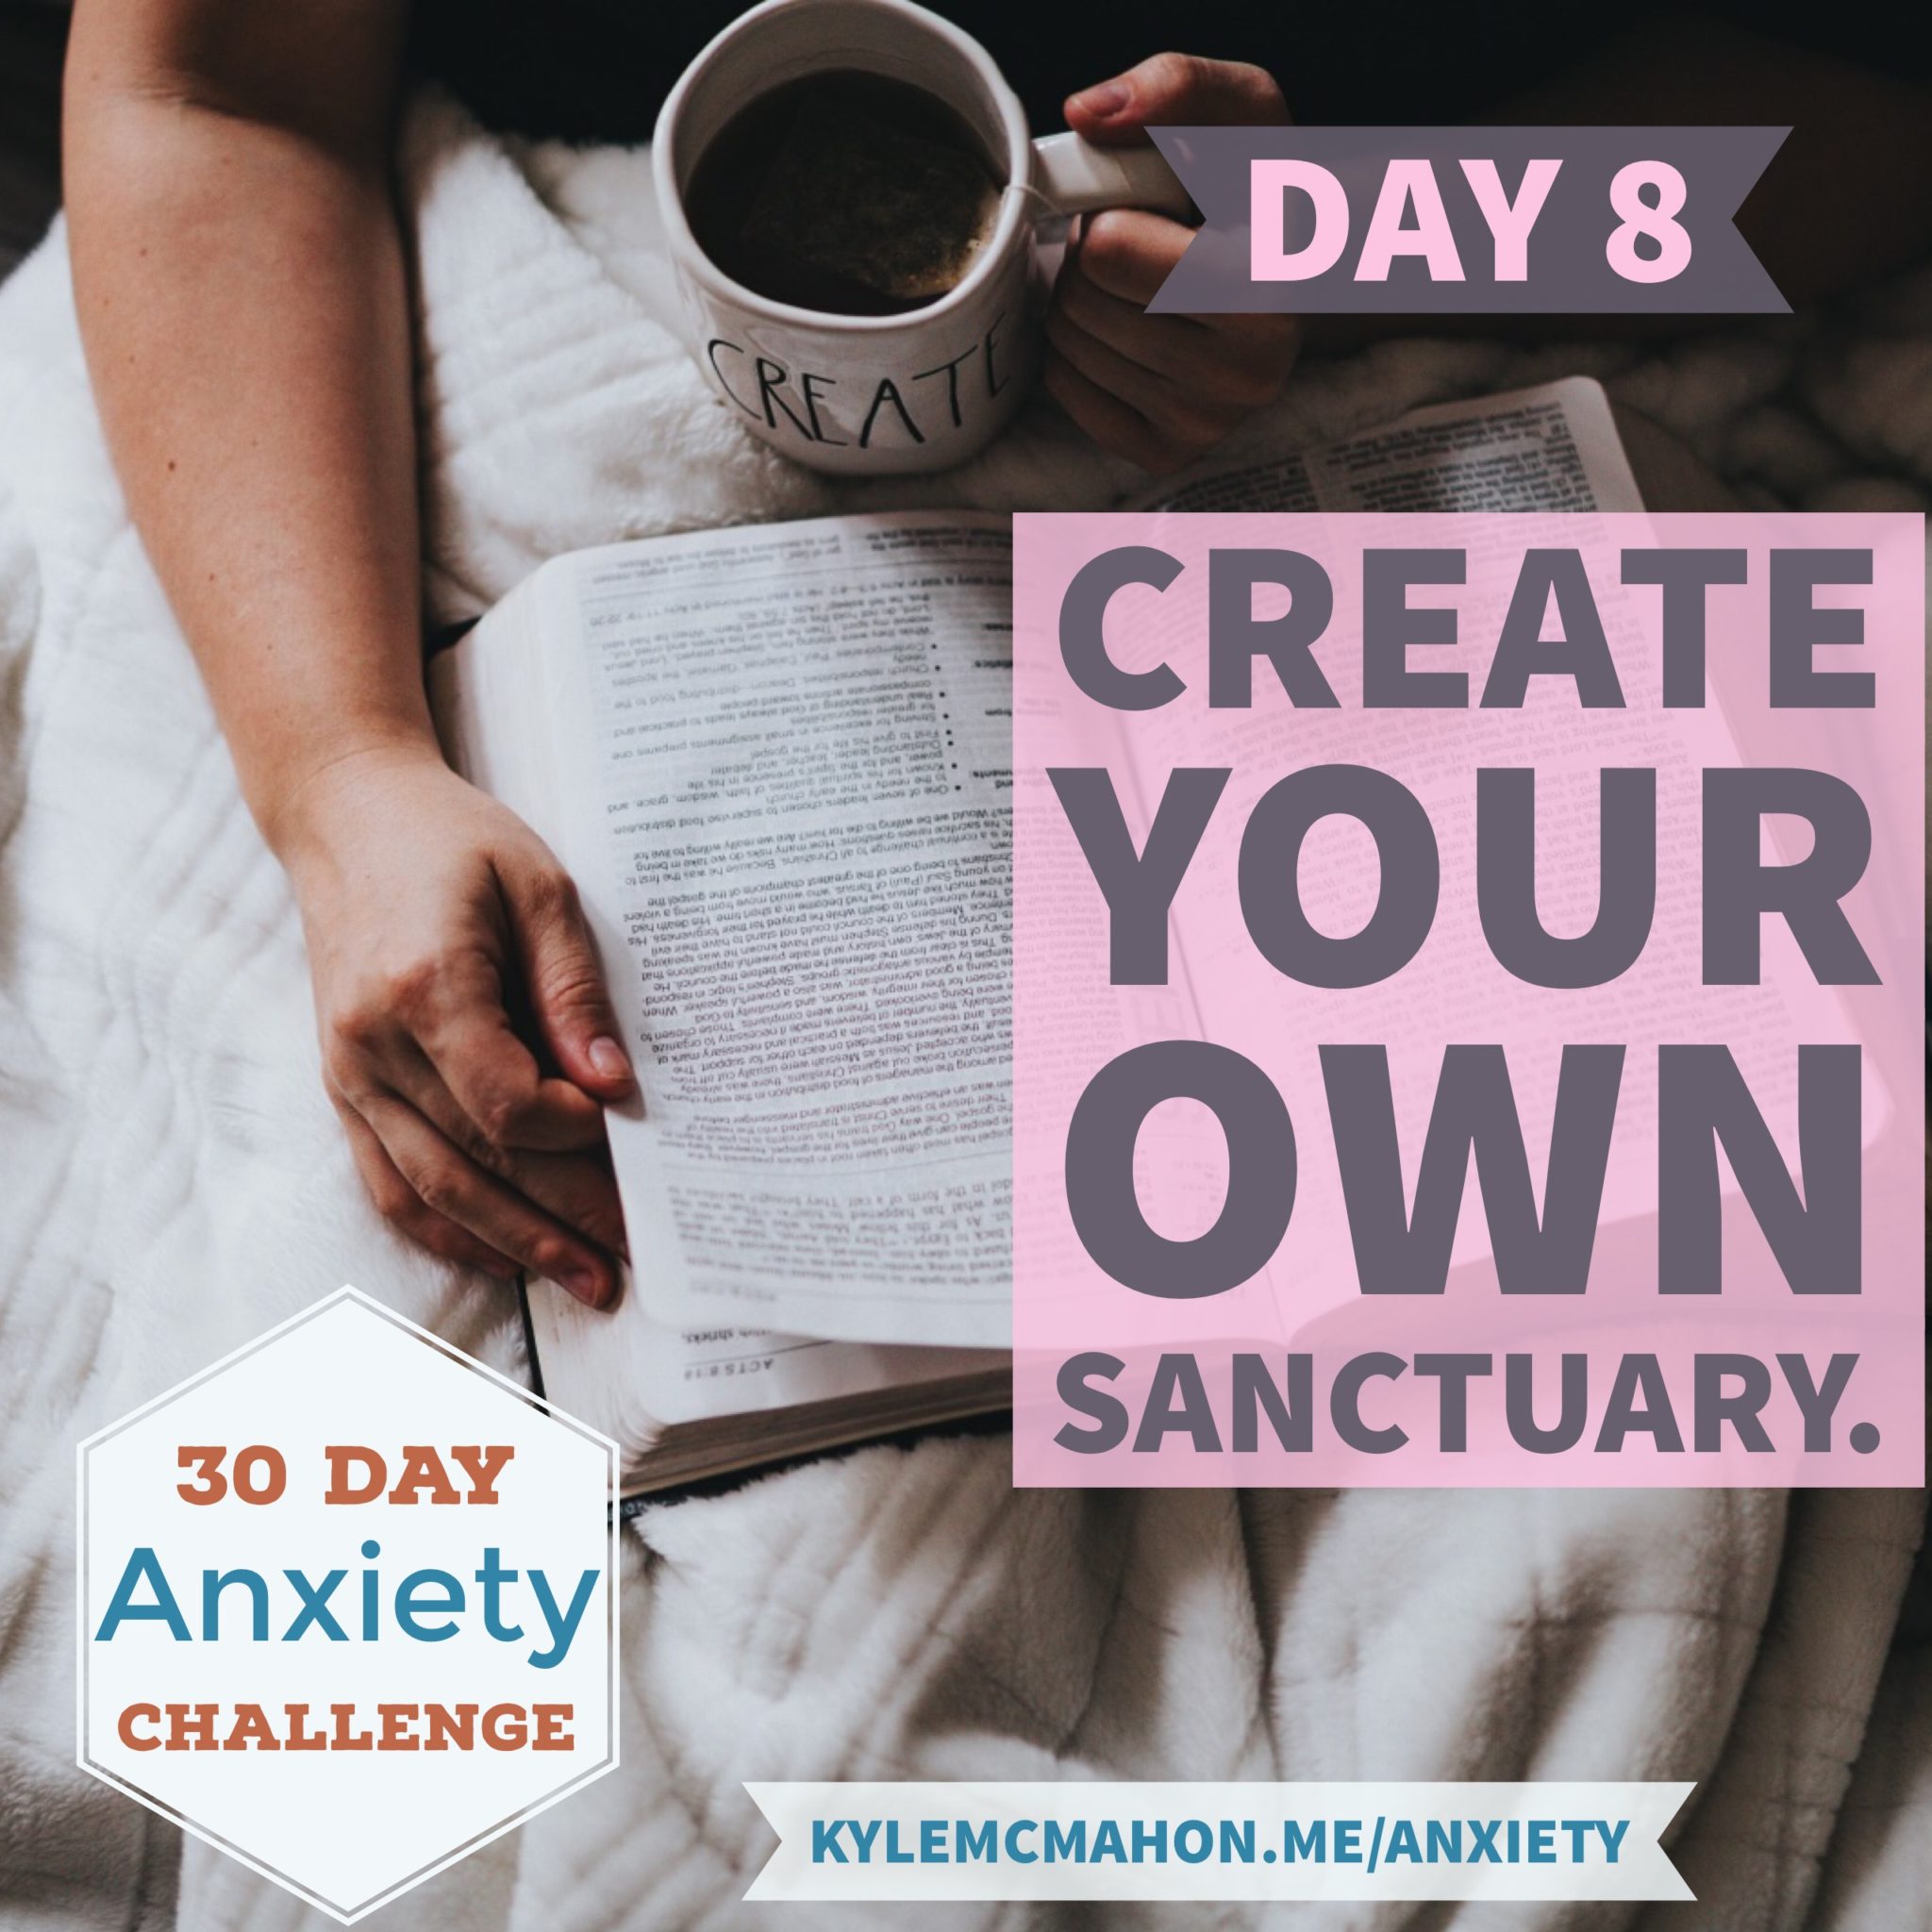 Day 8 of the 30 Day Anxiety Challenge with Kyle McMahon